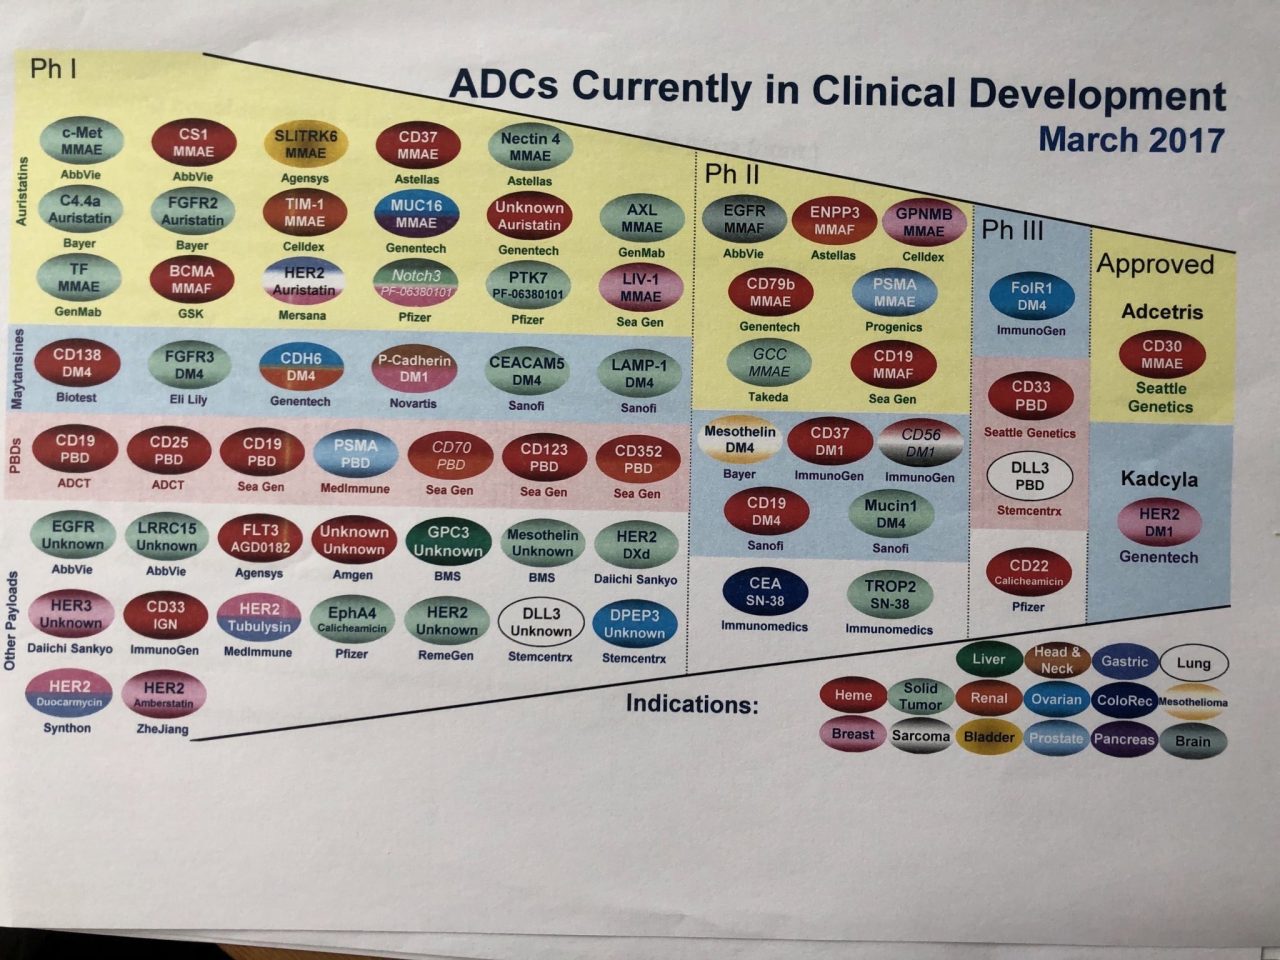 Raffaele Colombo: Remember the days of meeting handouts? And having all the ADCs summarized in one page?